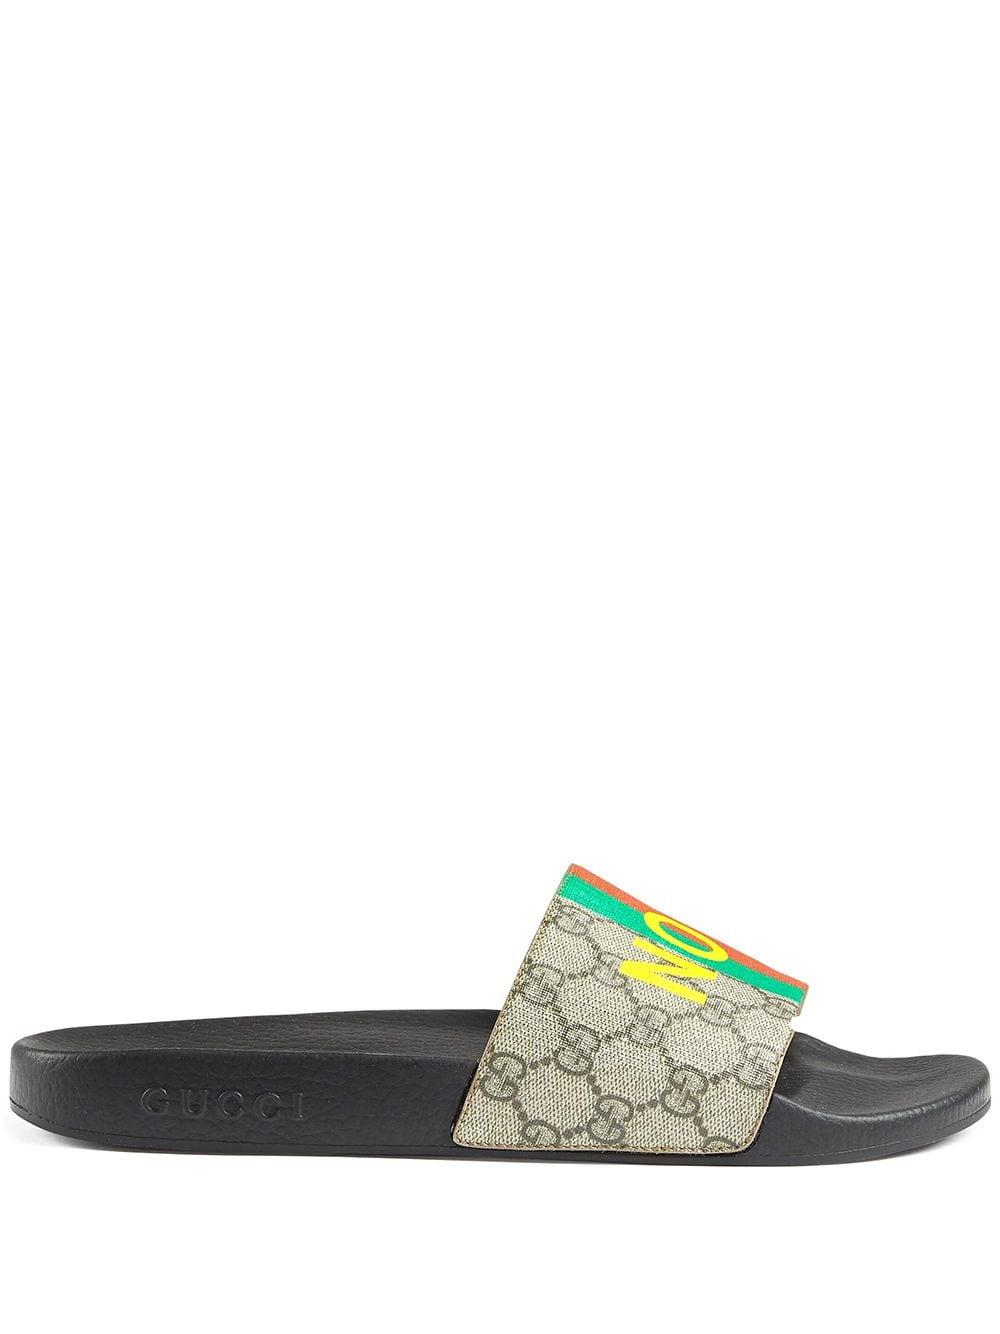 Gucci Leather Fake Not Print Sliders for Men - Lyst